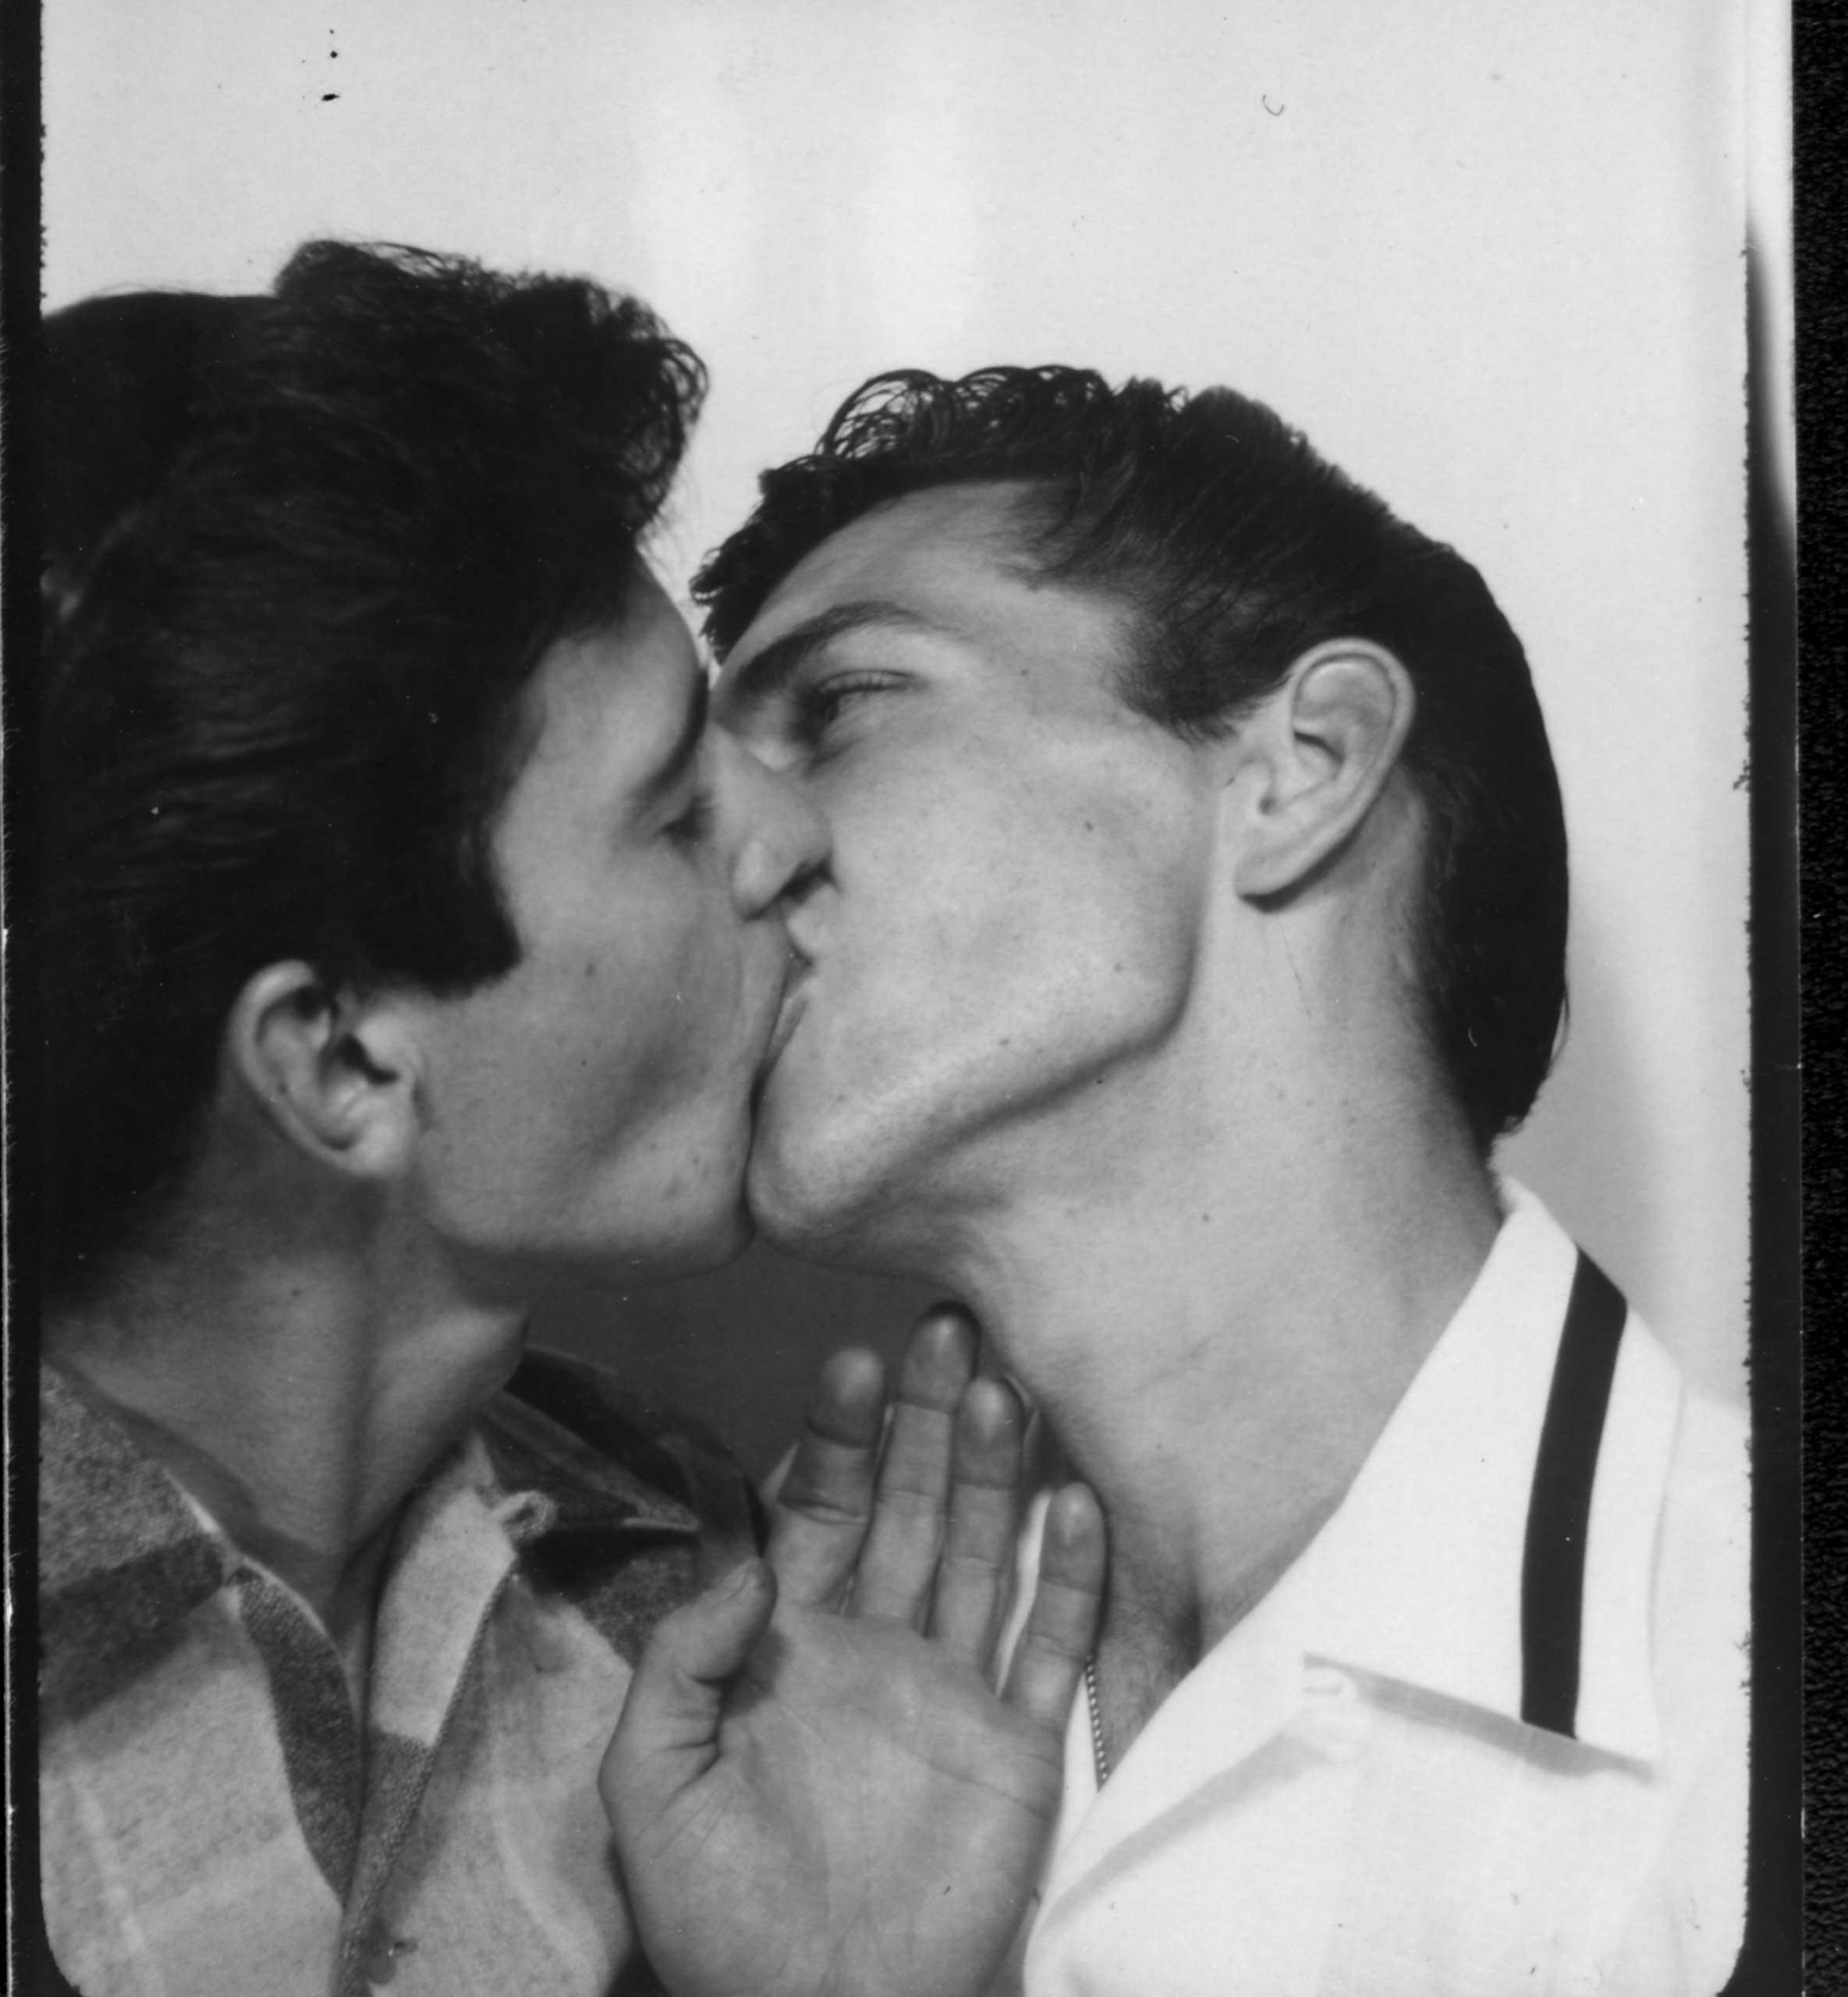 J. J. Belanger kissing a man in a photo booth.  PGE exhibition, Hastings Park.  Vancouver, Circa 1953.